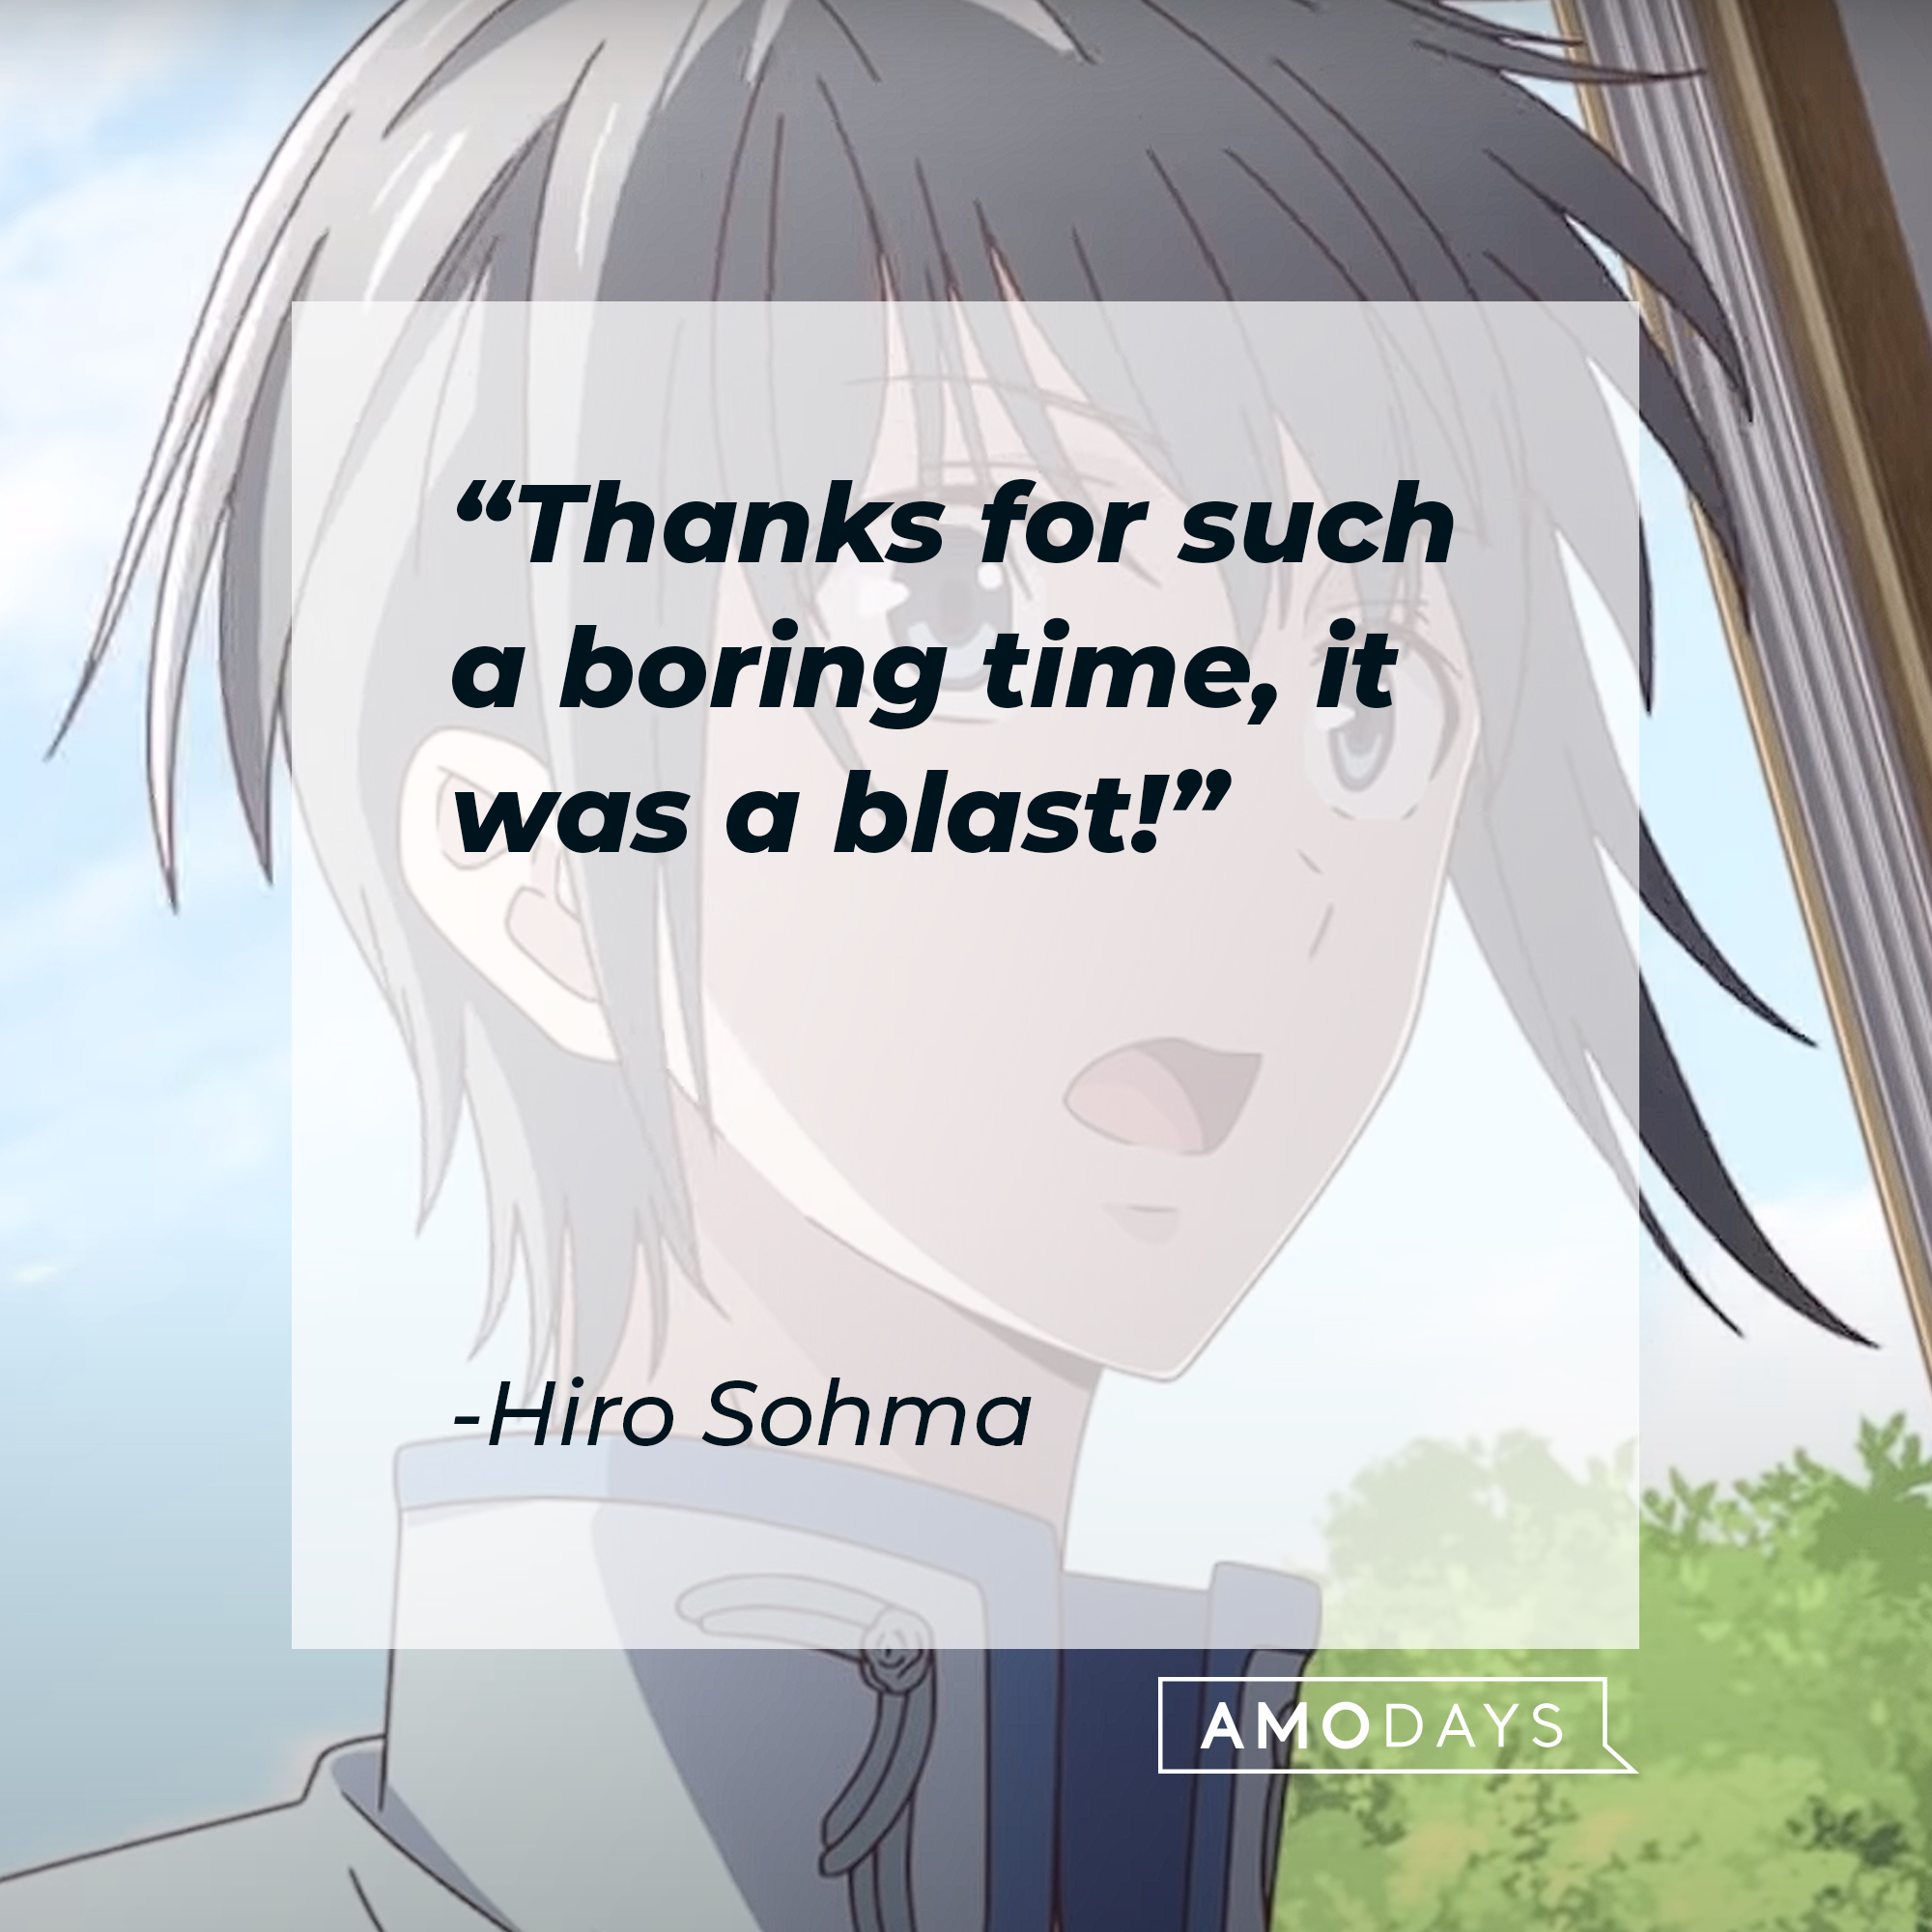 Hiro Sohma's quote: "Thanks for such a boring time, it was a blast!" | Image: youtube.com/Crunchyroll Collection